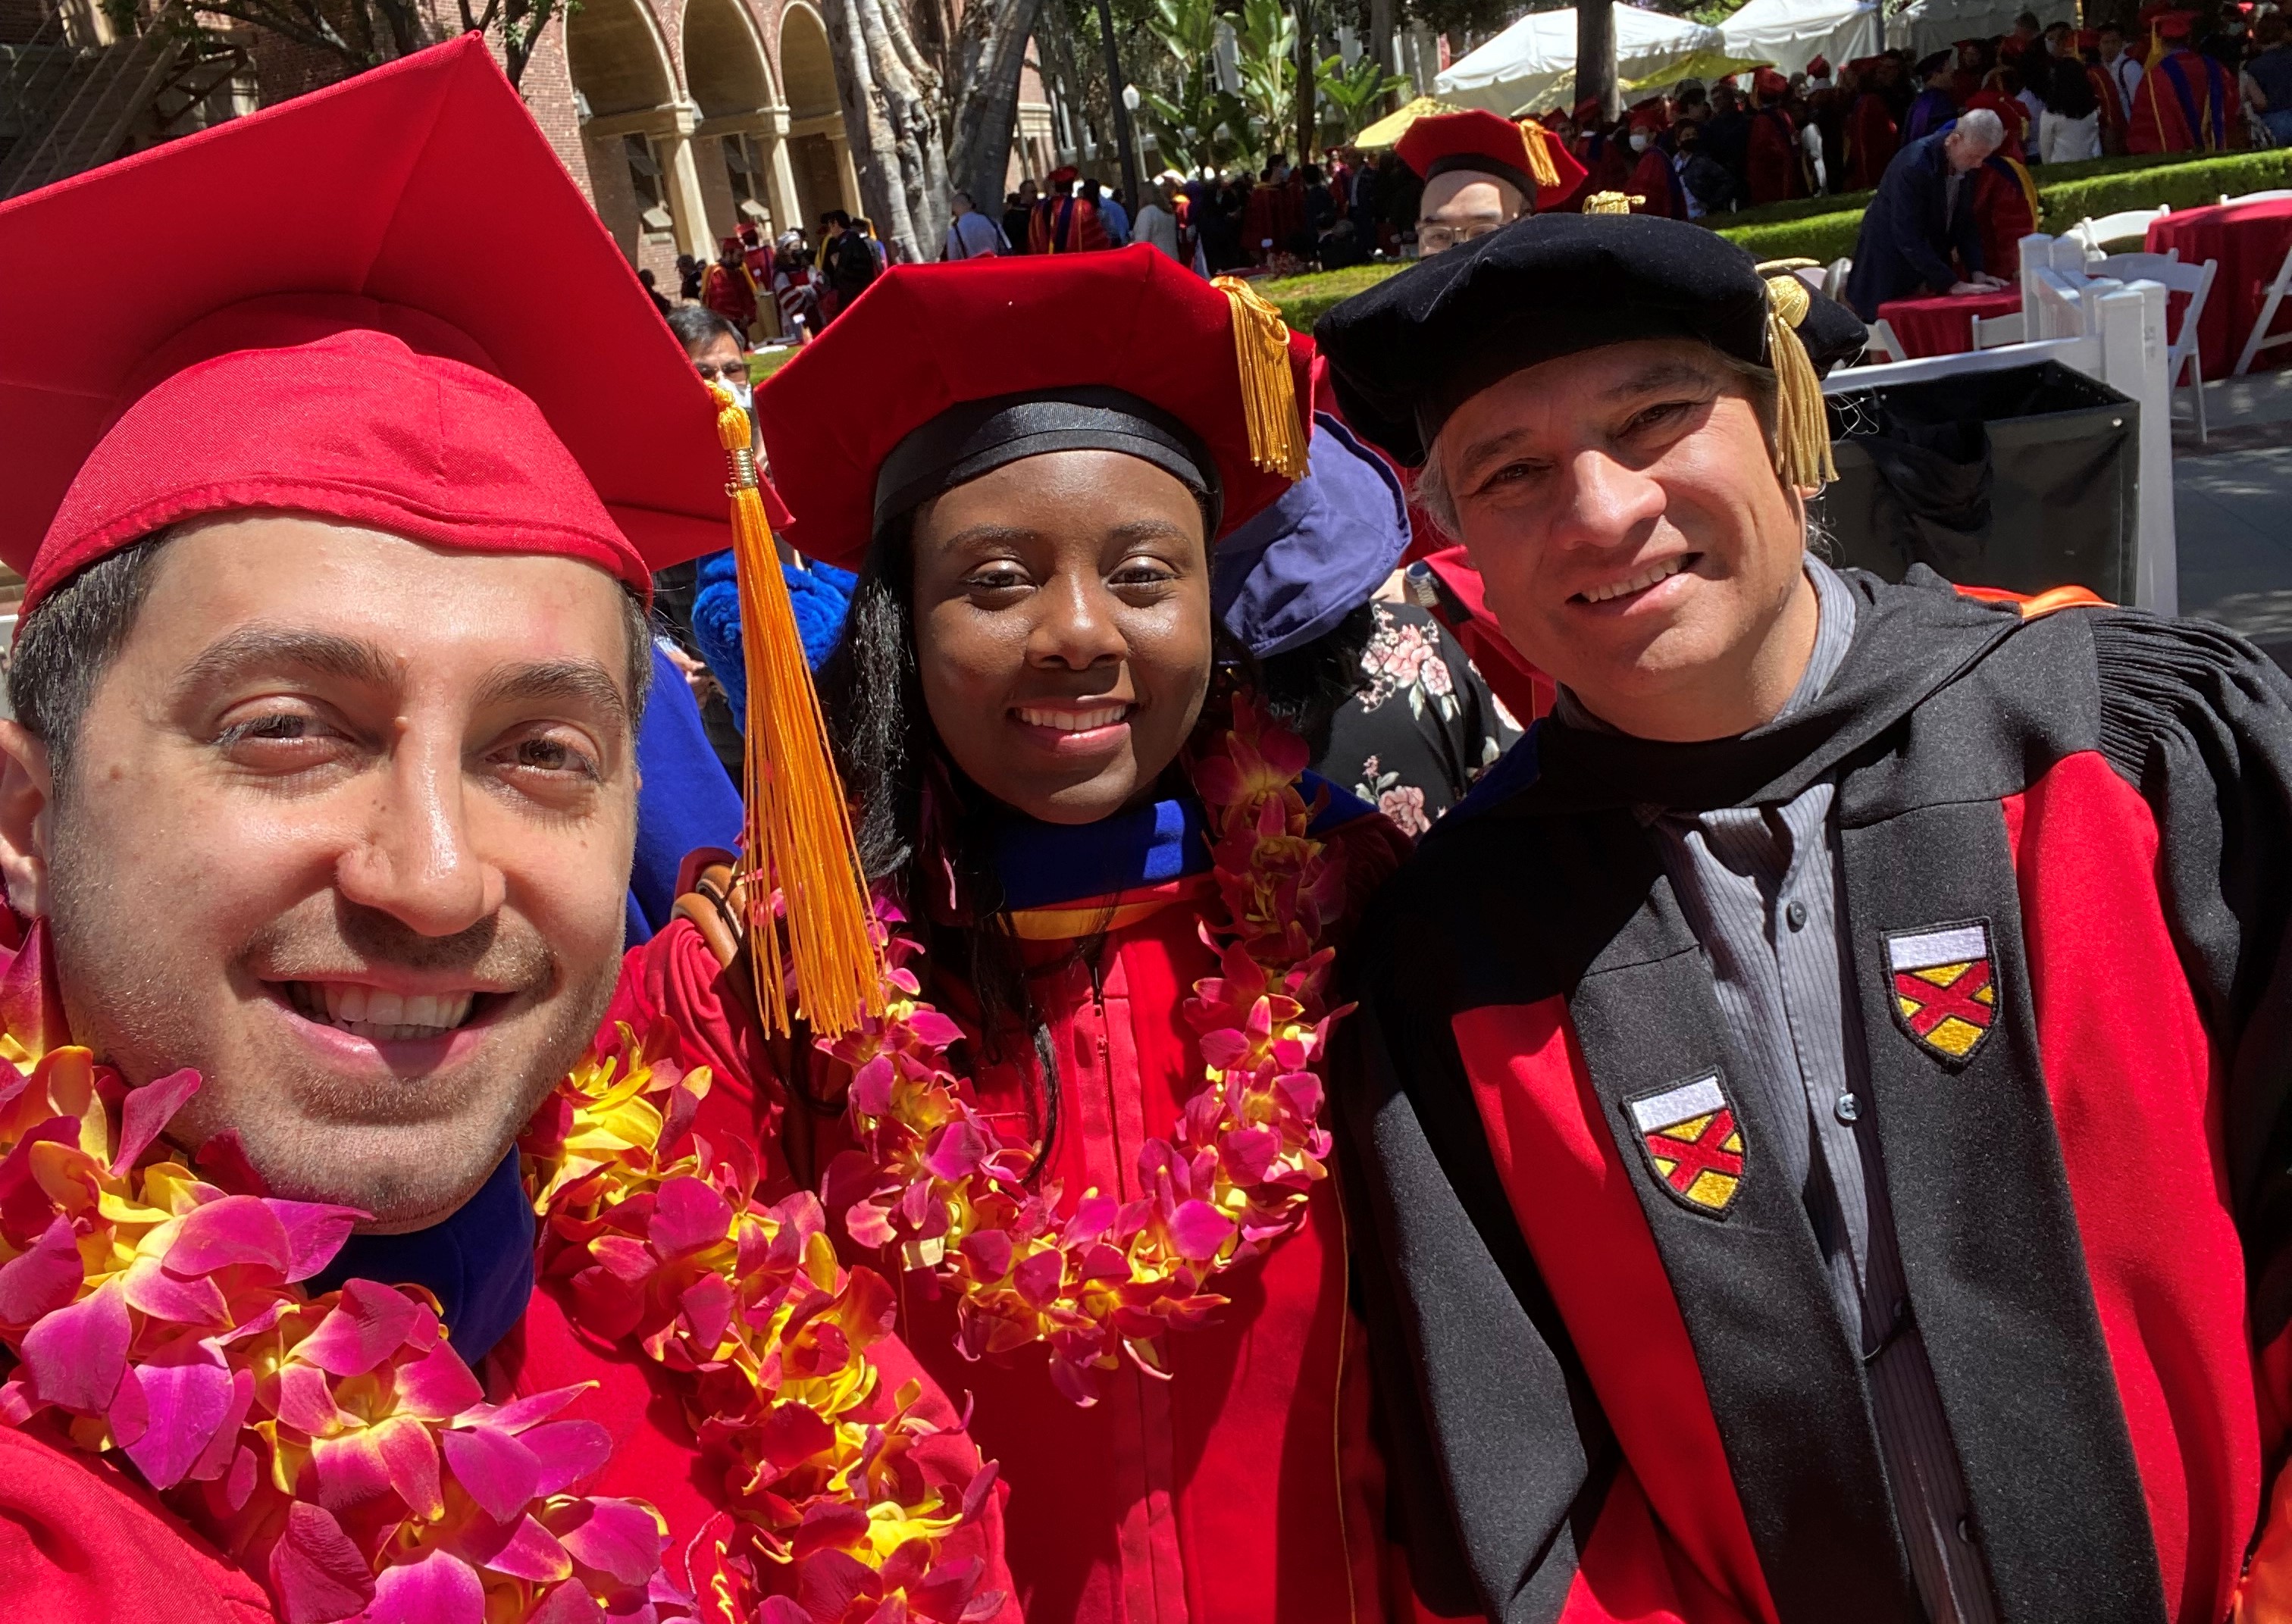 From left to right: Ali Marjaninejad, Jasmine Berry, and Francisco Valero-Cuevas. Ali and Jasmine are wearing red graduation caps and gowns with red and yellow flower leis around their necks. Francisco is wearing a black graduation cap and gown.